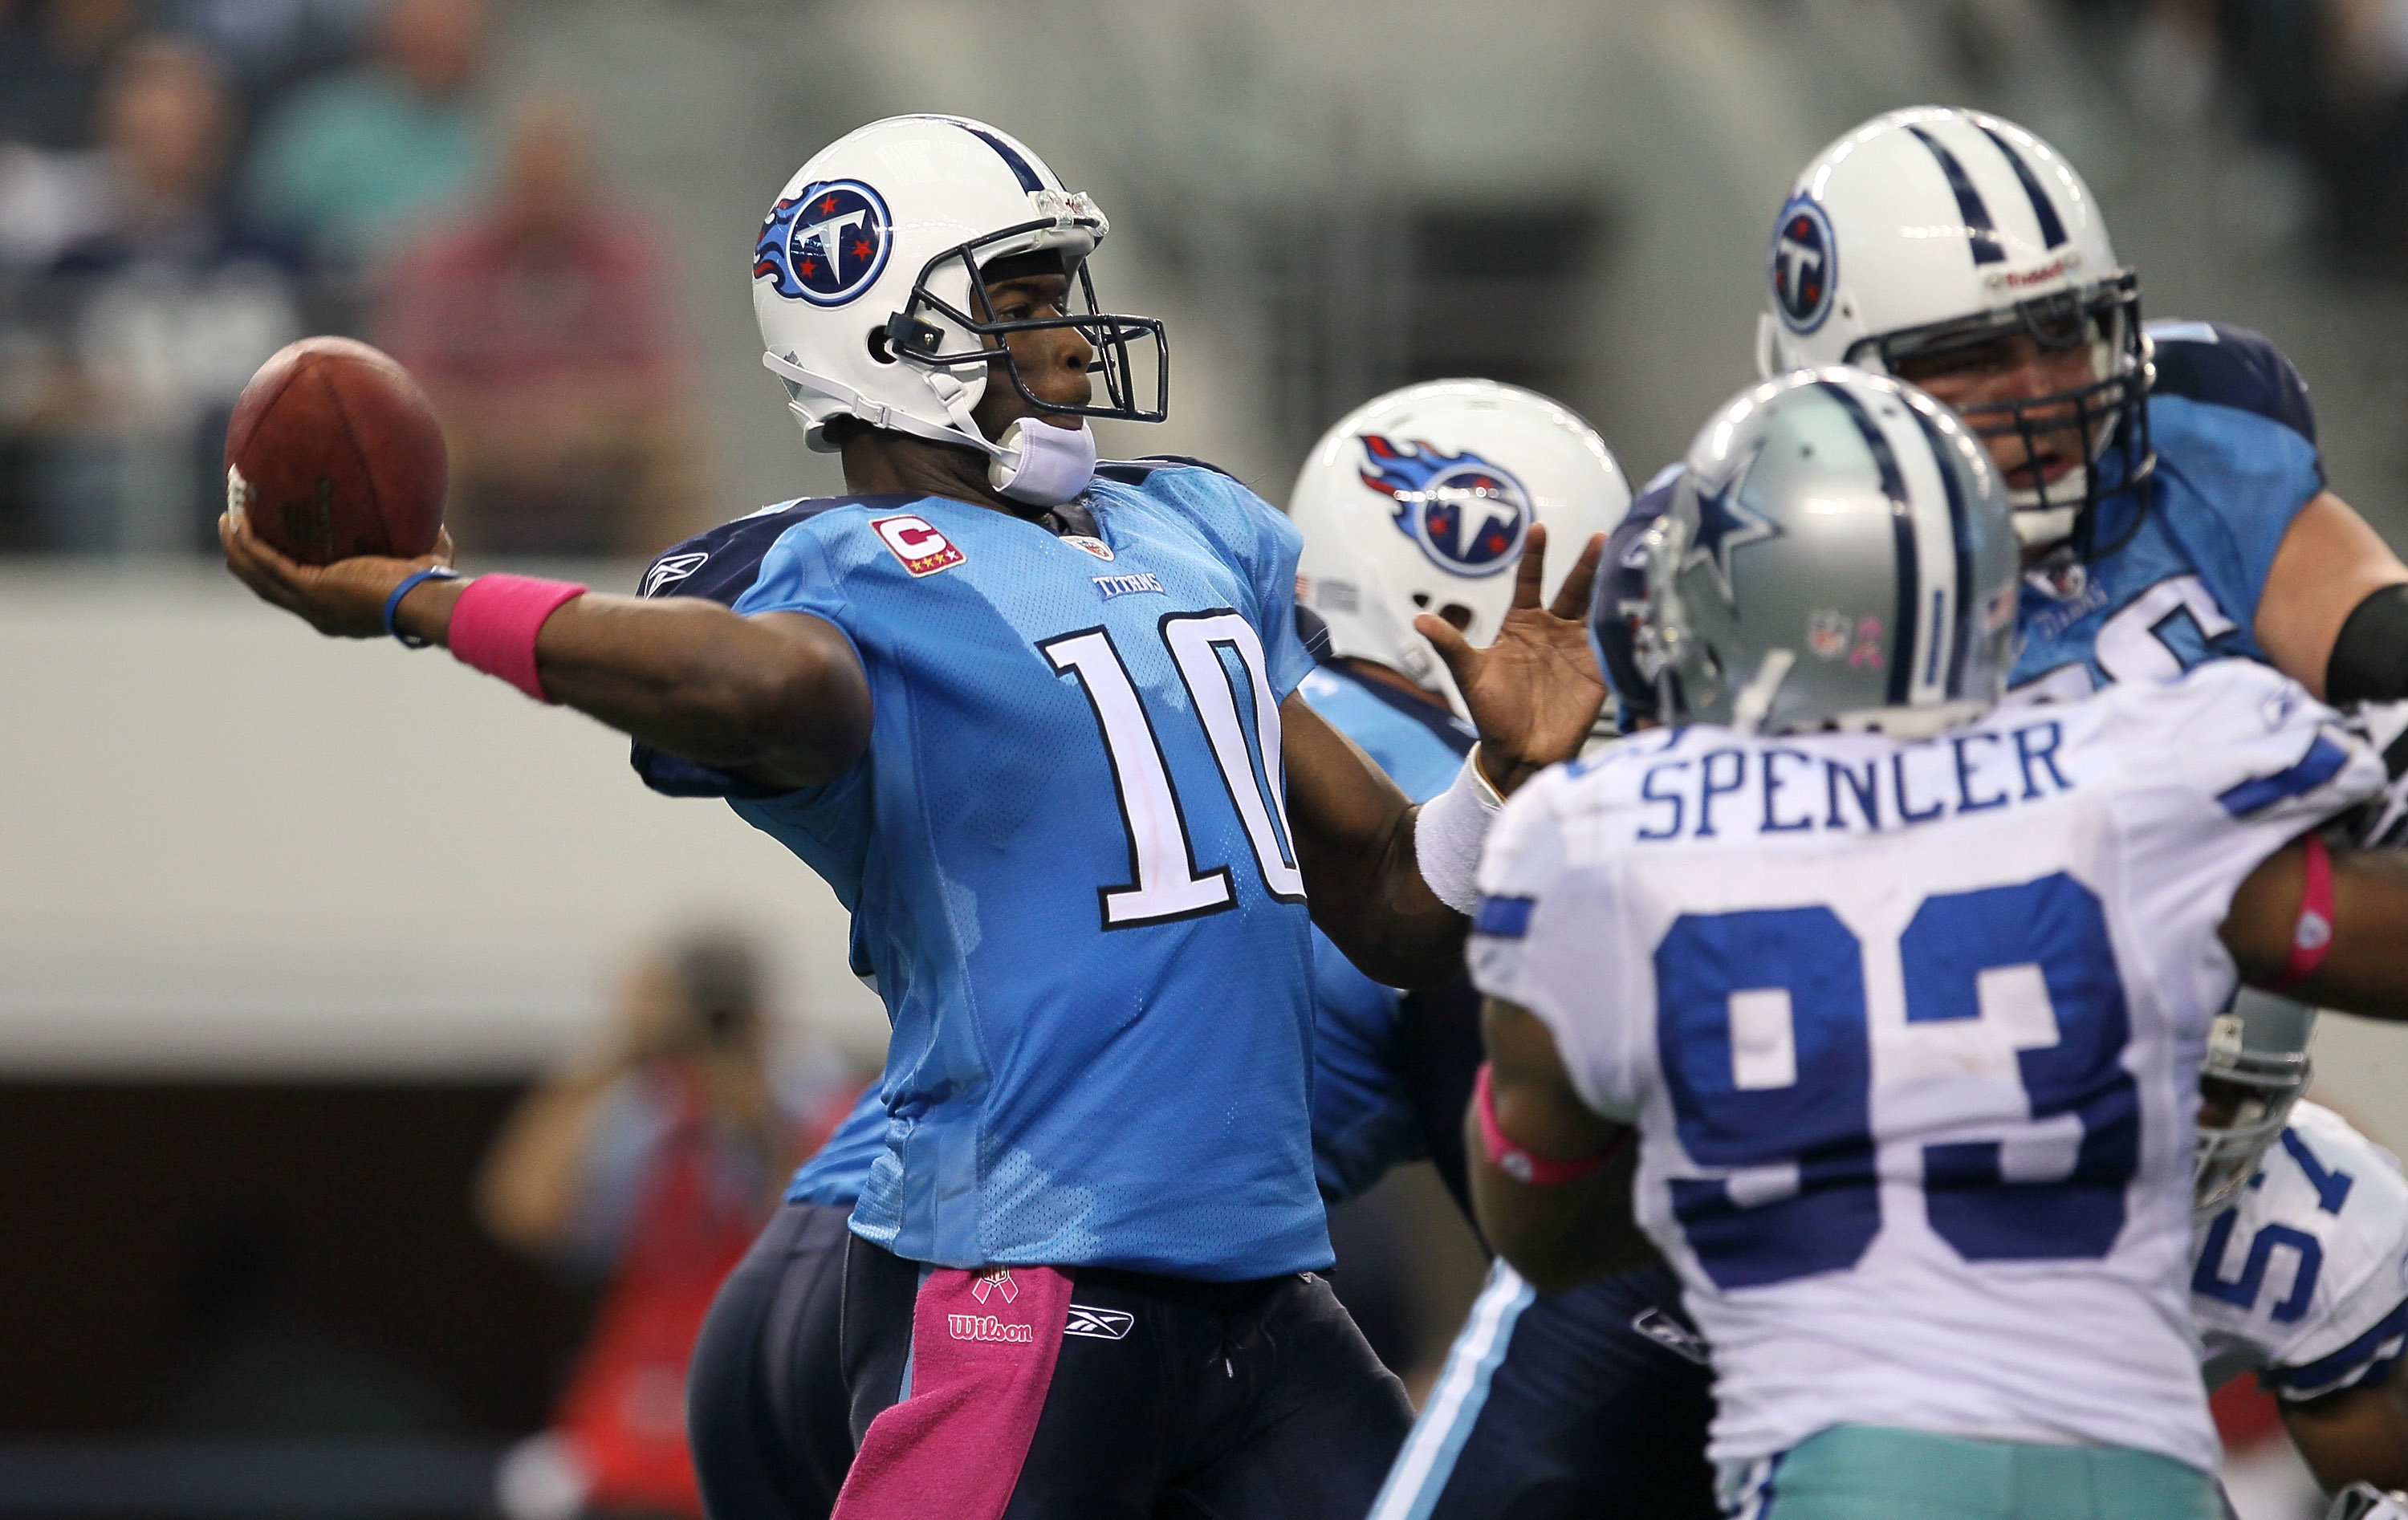 Tennessee's Vince Young has done a good job of leading the run-first Titans' offense